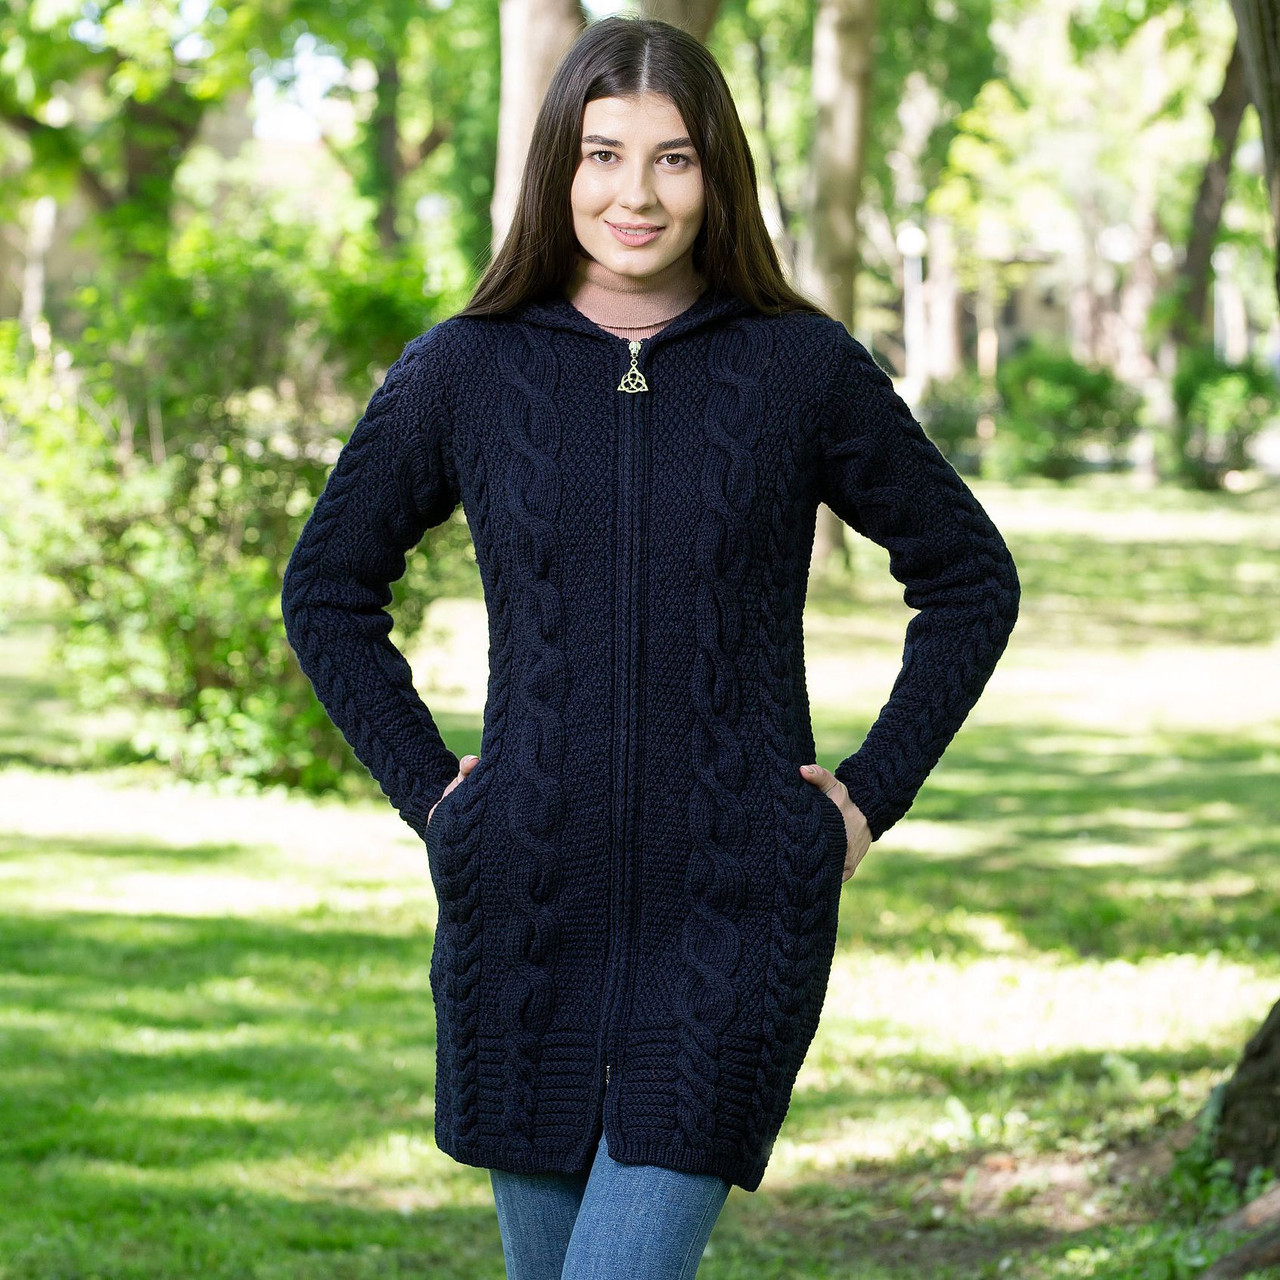 https://cdn11.bigcommerce.com/s-6psifr4fwf/images/stencil/1280x1280/products/559/877/Aran_Cable_Knit_Hooded_Zip_Coatigan_Navy_Front__88635.1709302274.jpg?c=1